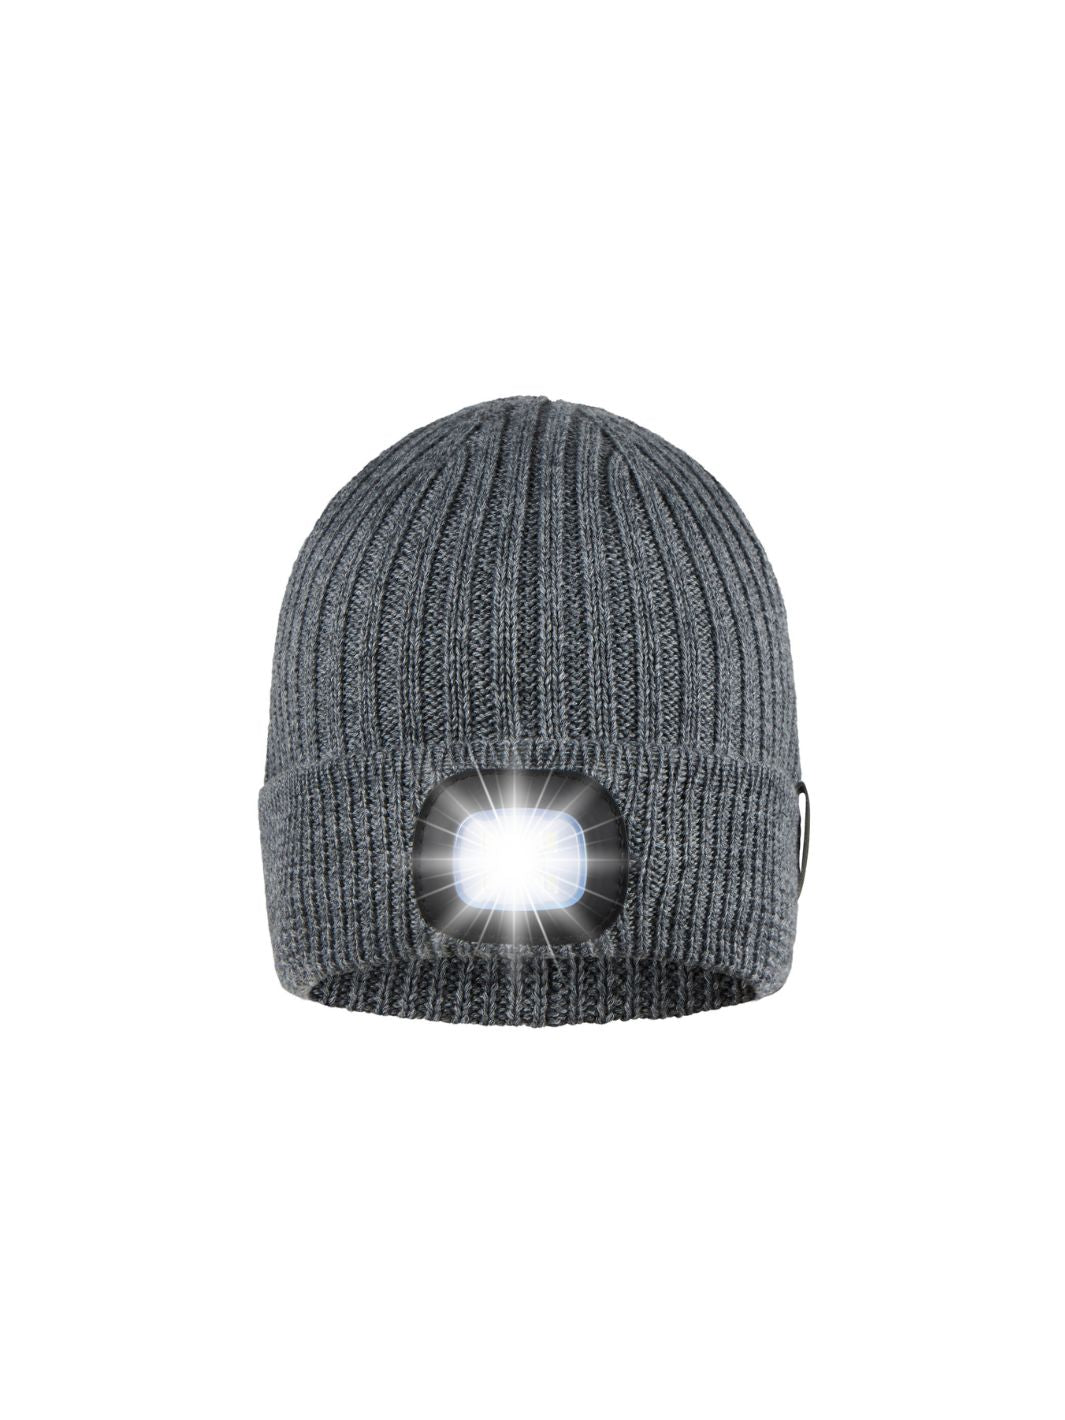 From Stable to Summit: The Unisex Wool LED Torch Beanie for Every Outdoor Enthusiast